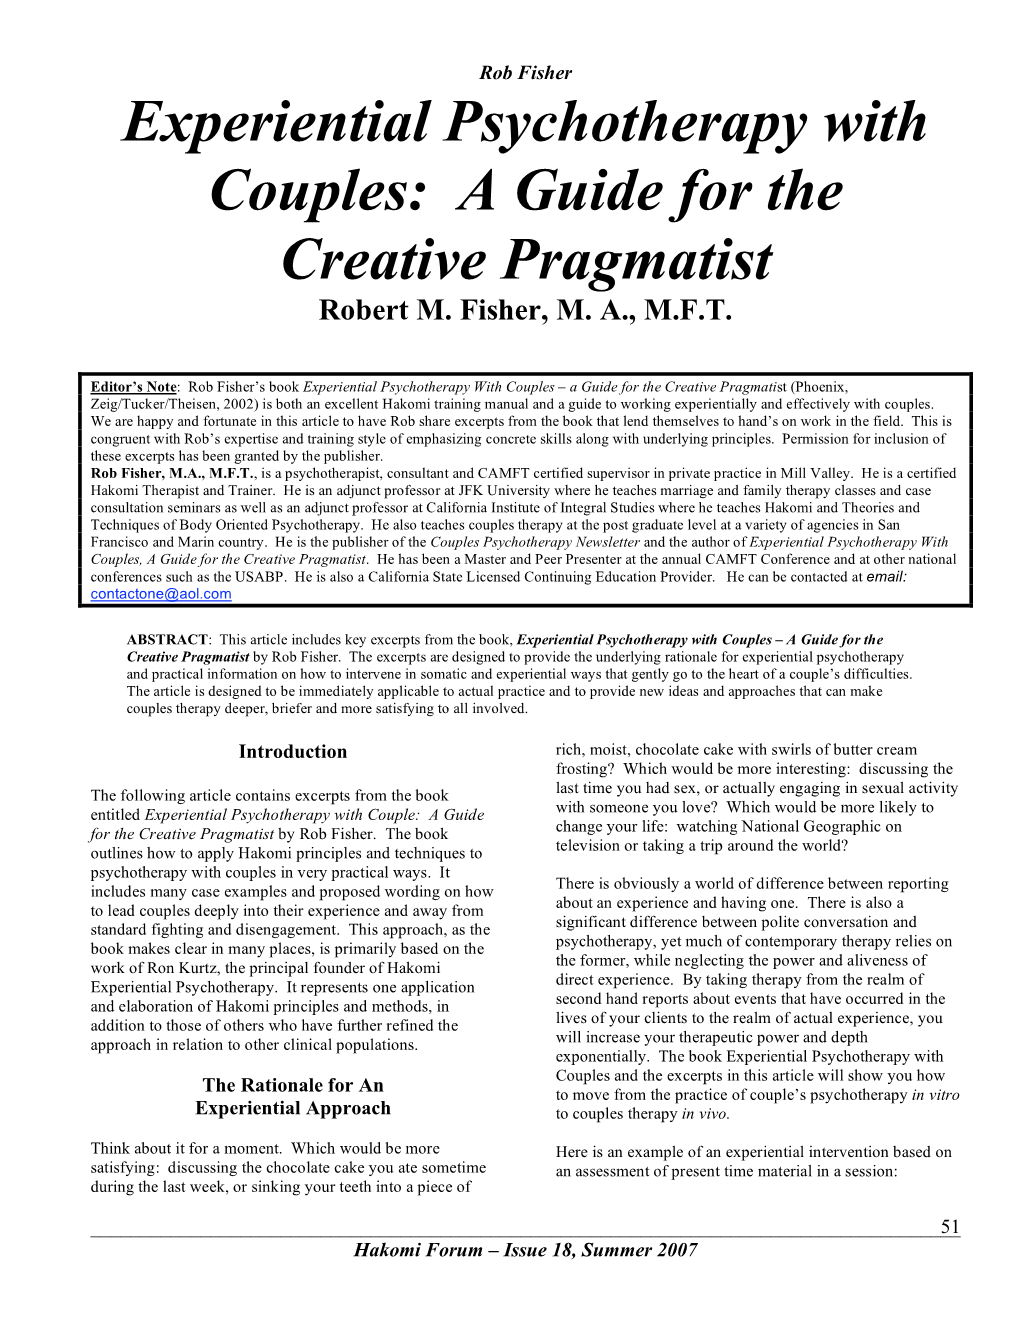 Experiential Psychotherapy with Couples: a Guide for the Creative Pragmatist Robert M